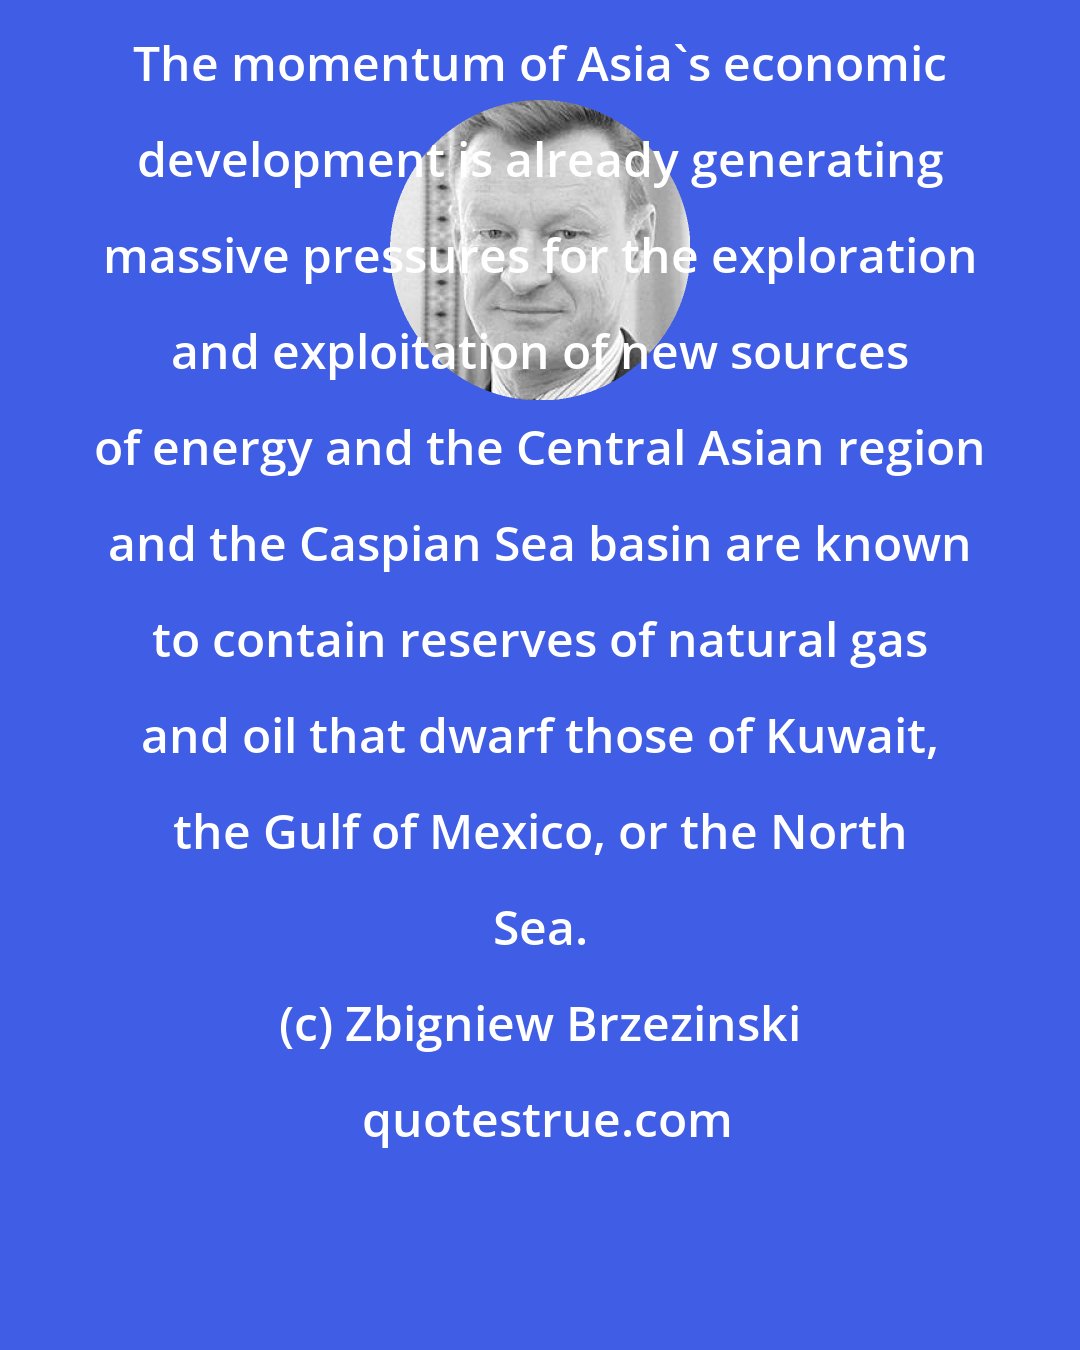 Zbigniew Brzezinski: The momentum of Asia's economic development is already generating massive pressures for the exploration and exploitation of new sources of energy and the Central Asian region and the Caspian Sea basin are known to contain reserves of natural gas and oil that dwarf those of Kuwait, the Gulf of Mexico, or the North Sea.